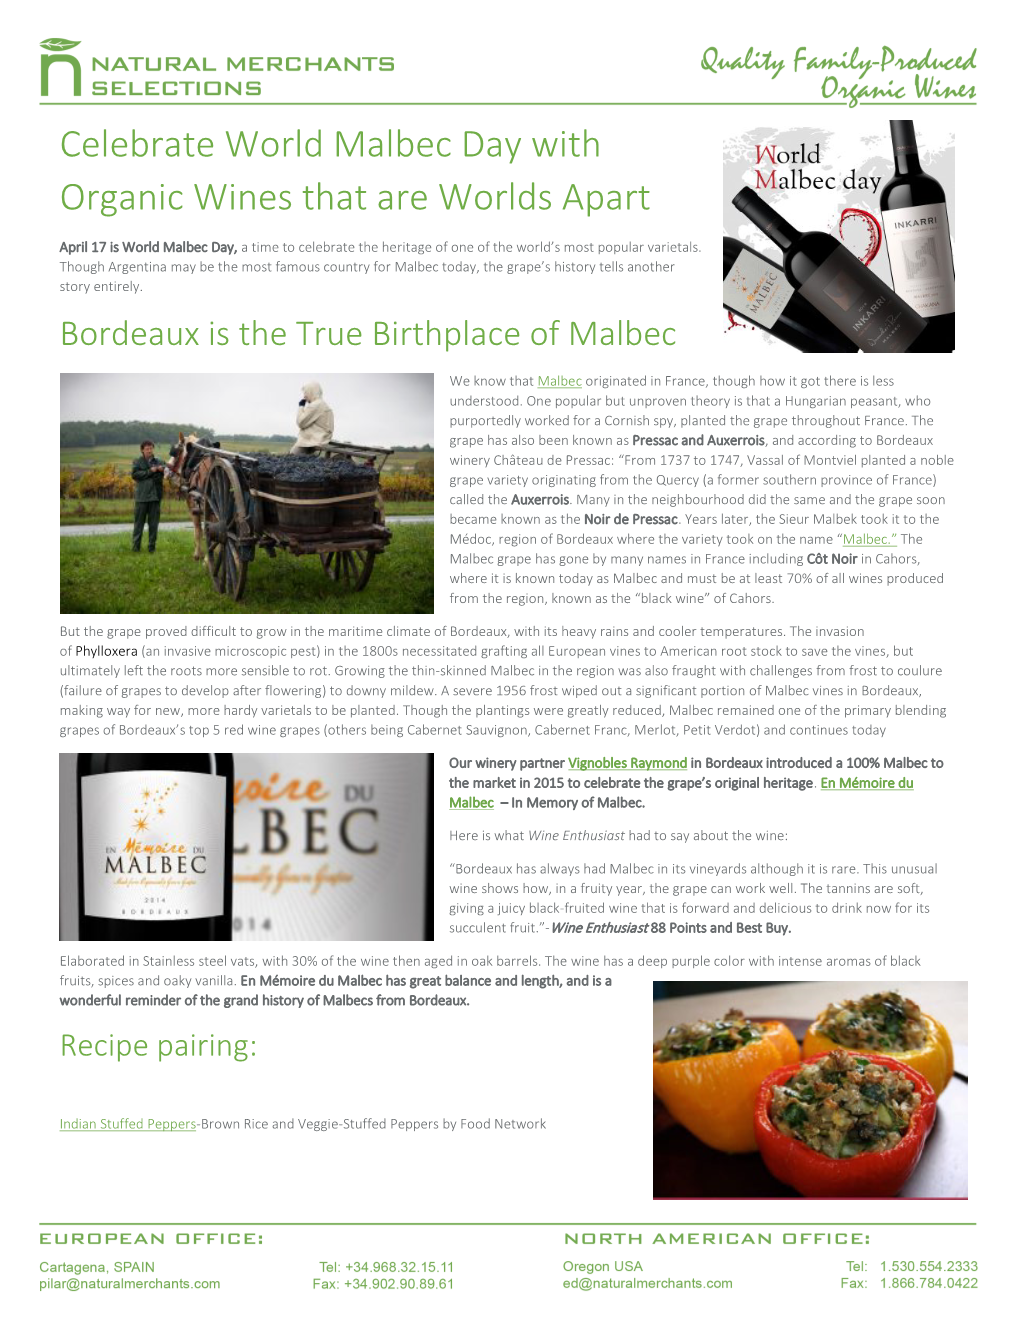 Celebrate World Malbec Day with Organic Wines That Are Worlds Apart